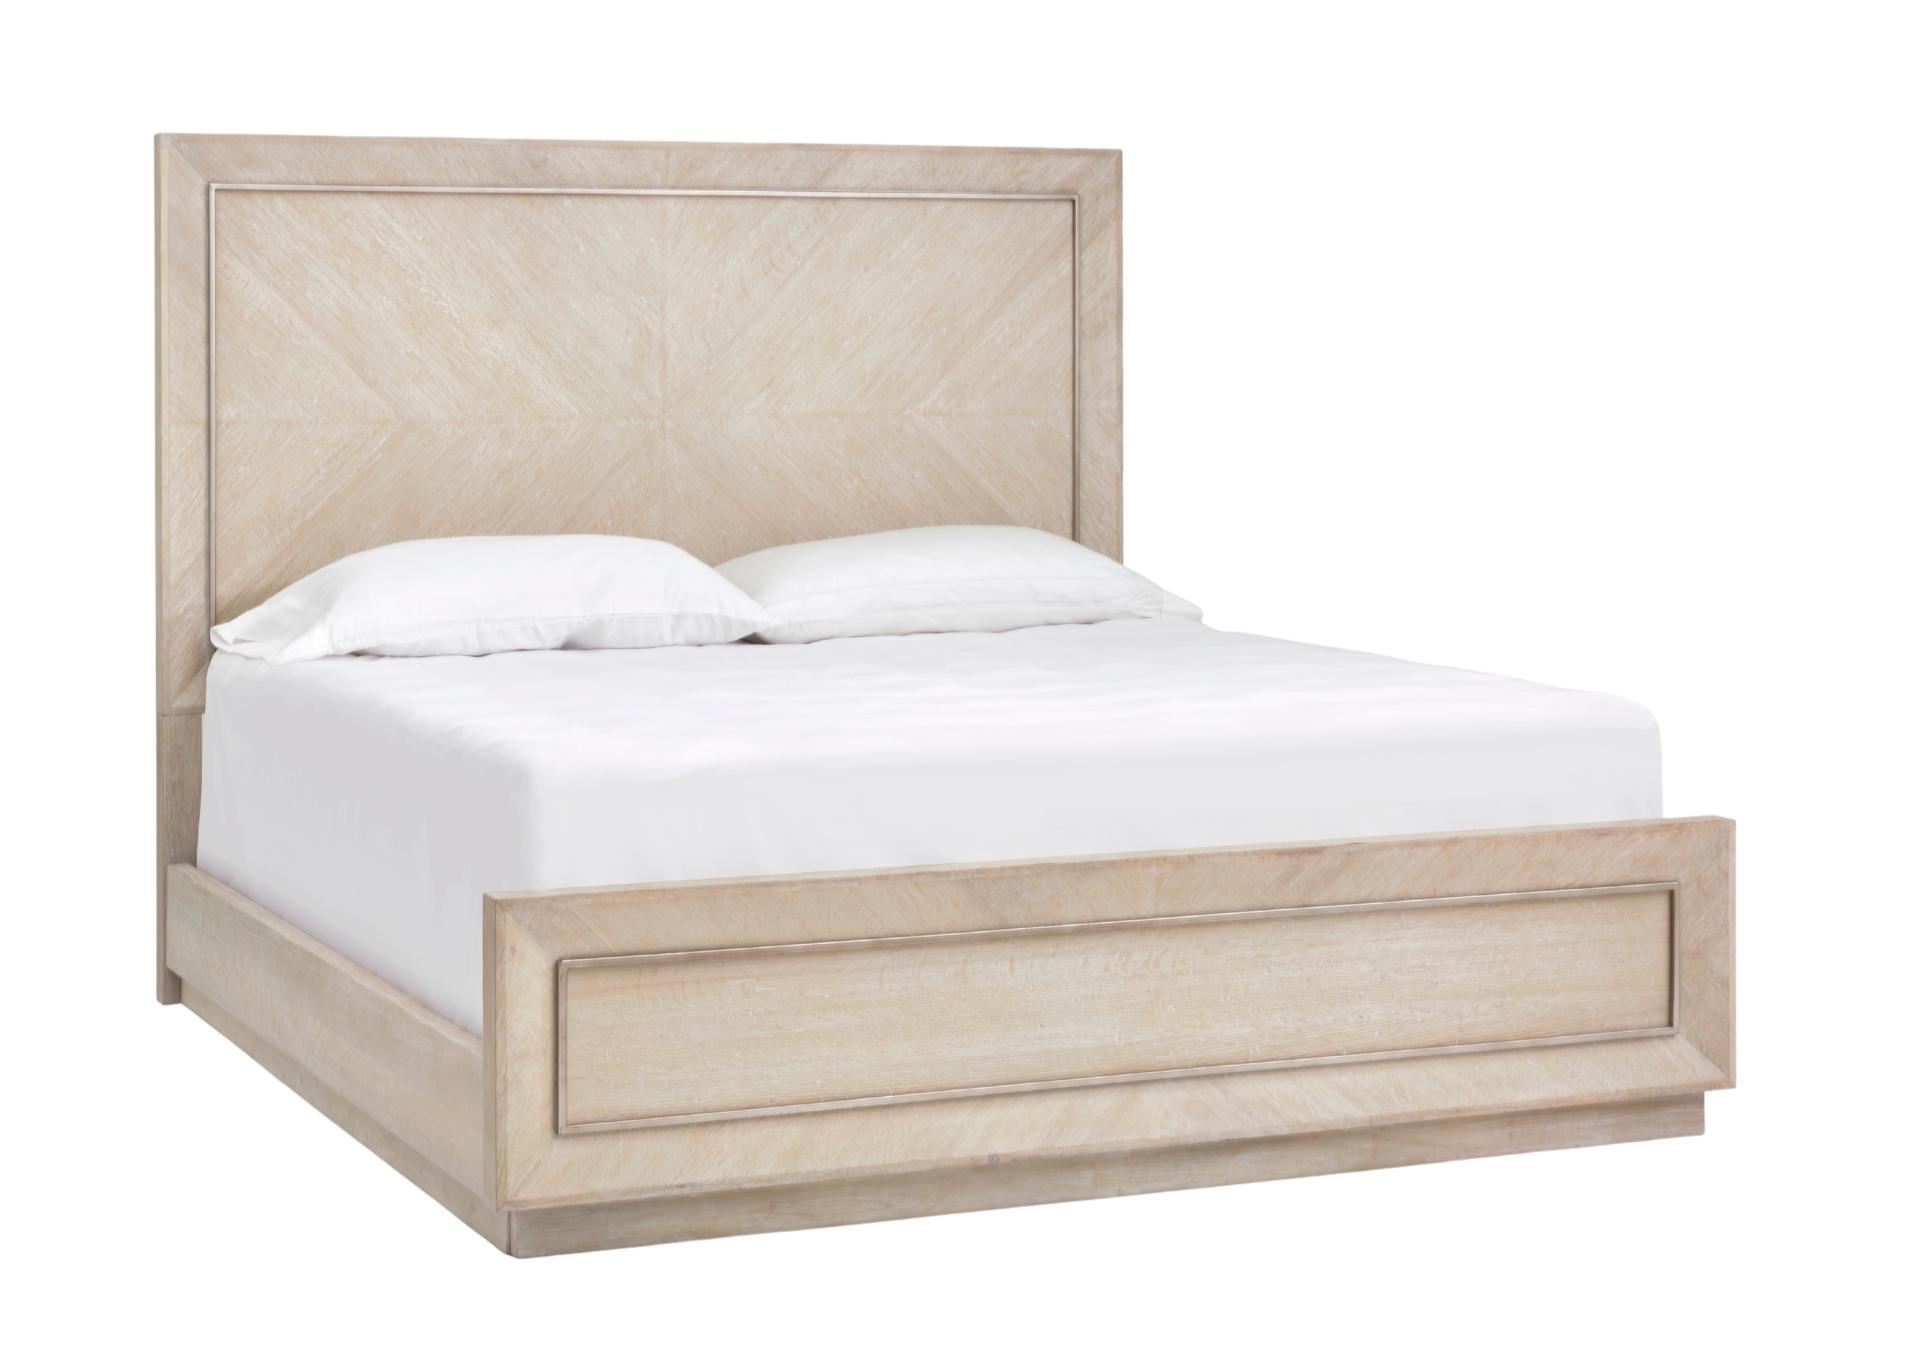 AMHERST WHITEWASH KING PANEL BED,MAGS